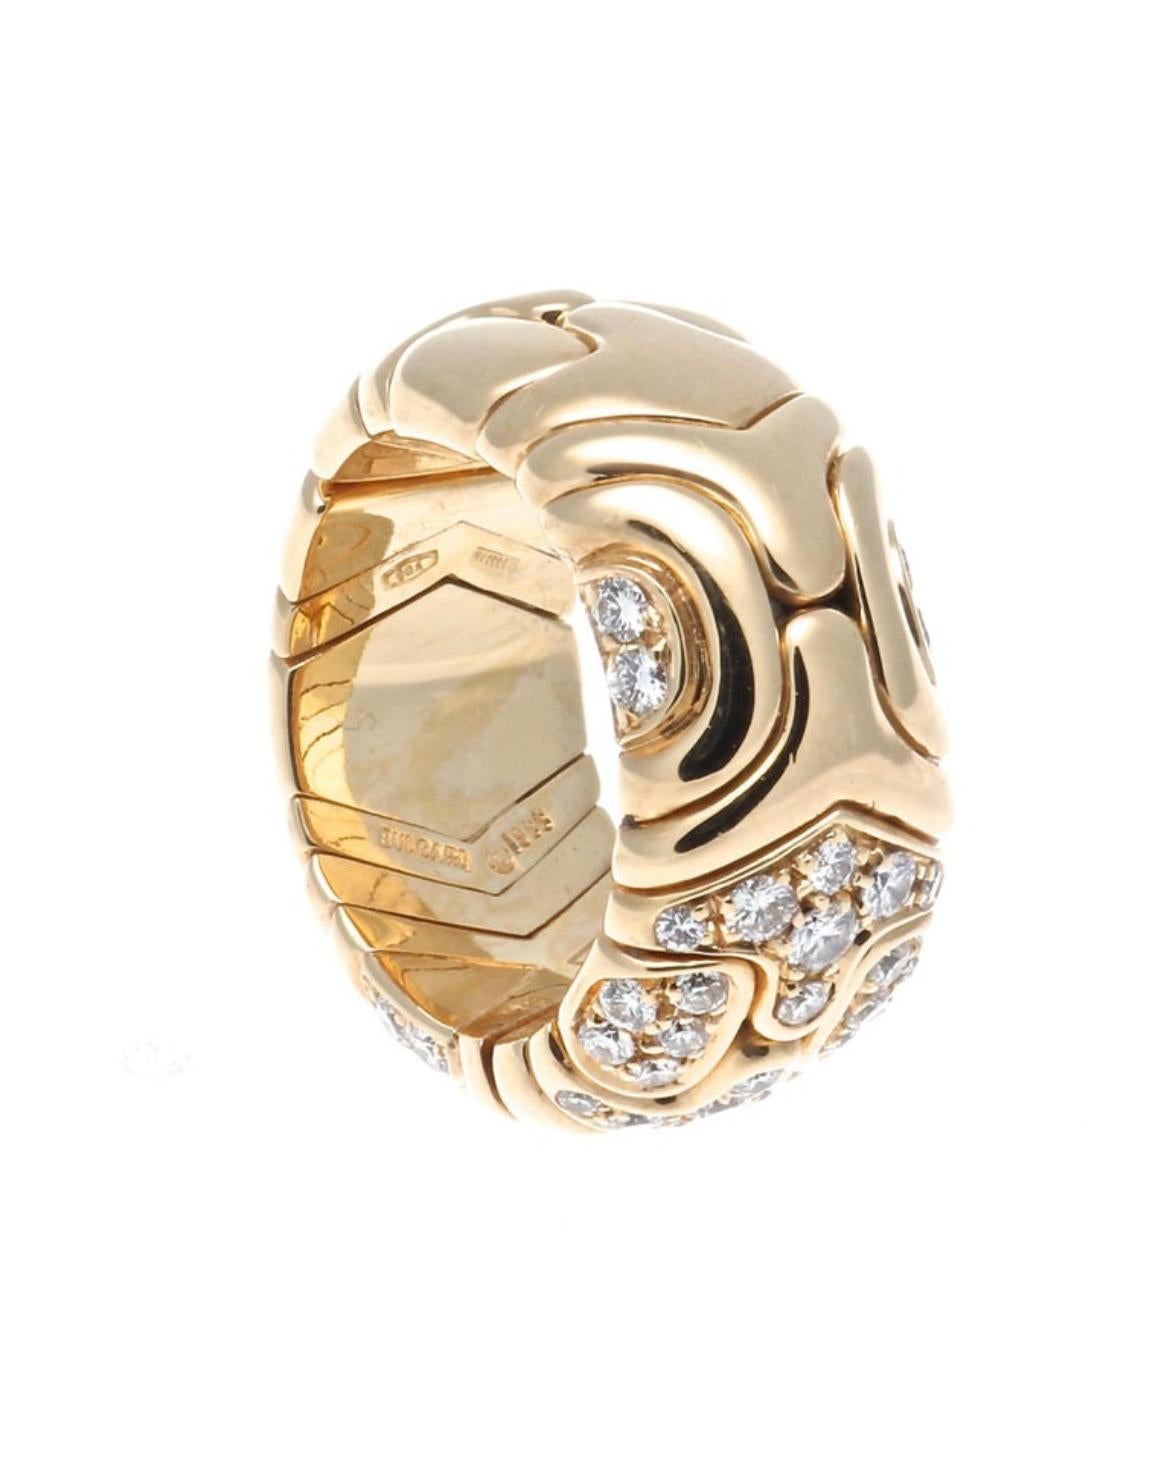 Vintage Glamour Alveare ring designed by Bvlgari.

A geometric flexible Alveare ring band, crafted in Rome Italy by the house of Bulgari in solid yellow  18k gold, it features 1 carats of colorless sparkling Round brilliant cut Diamonds. Dated